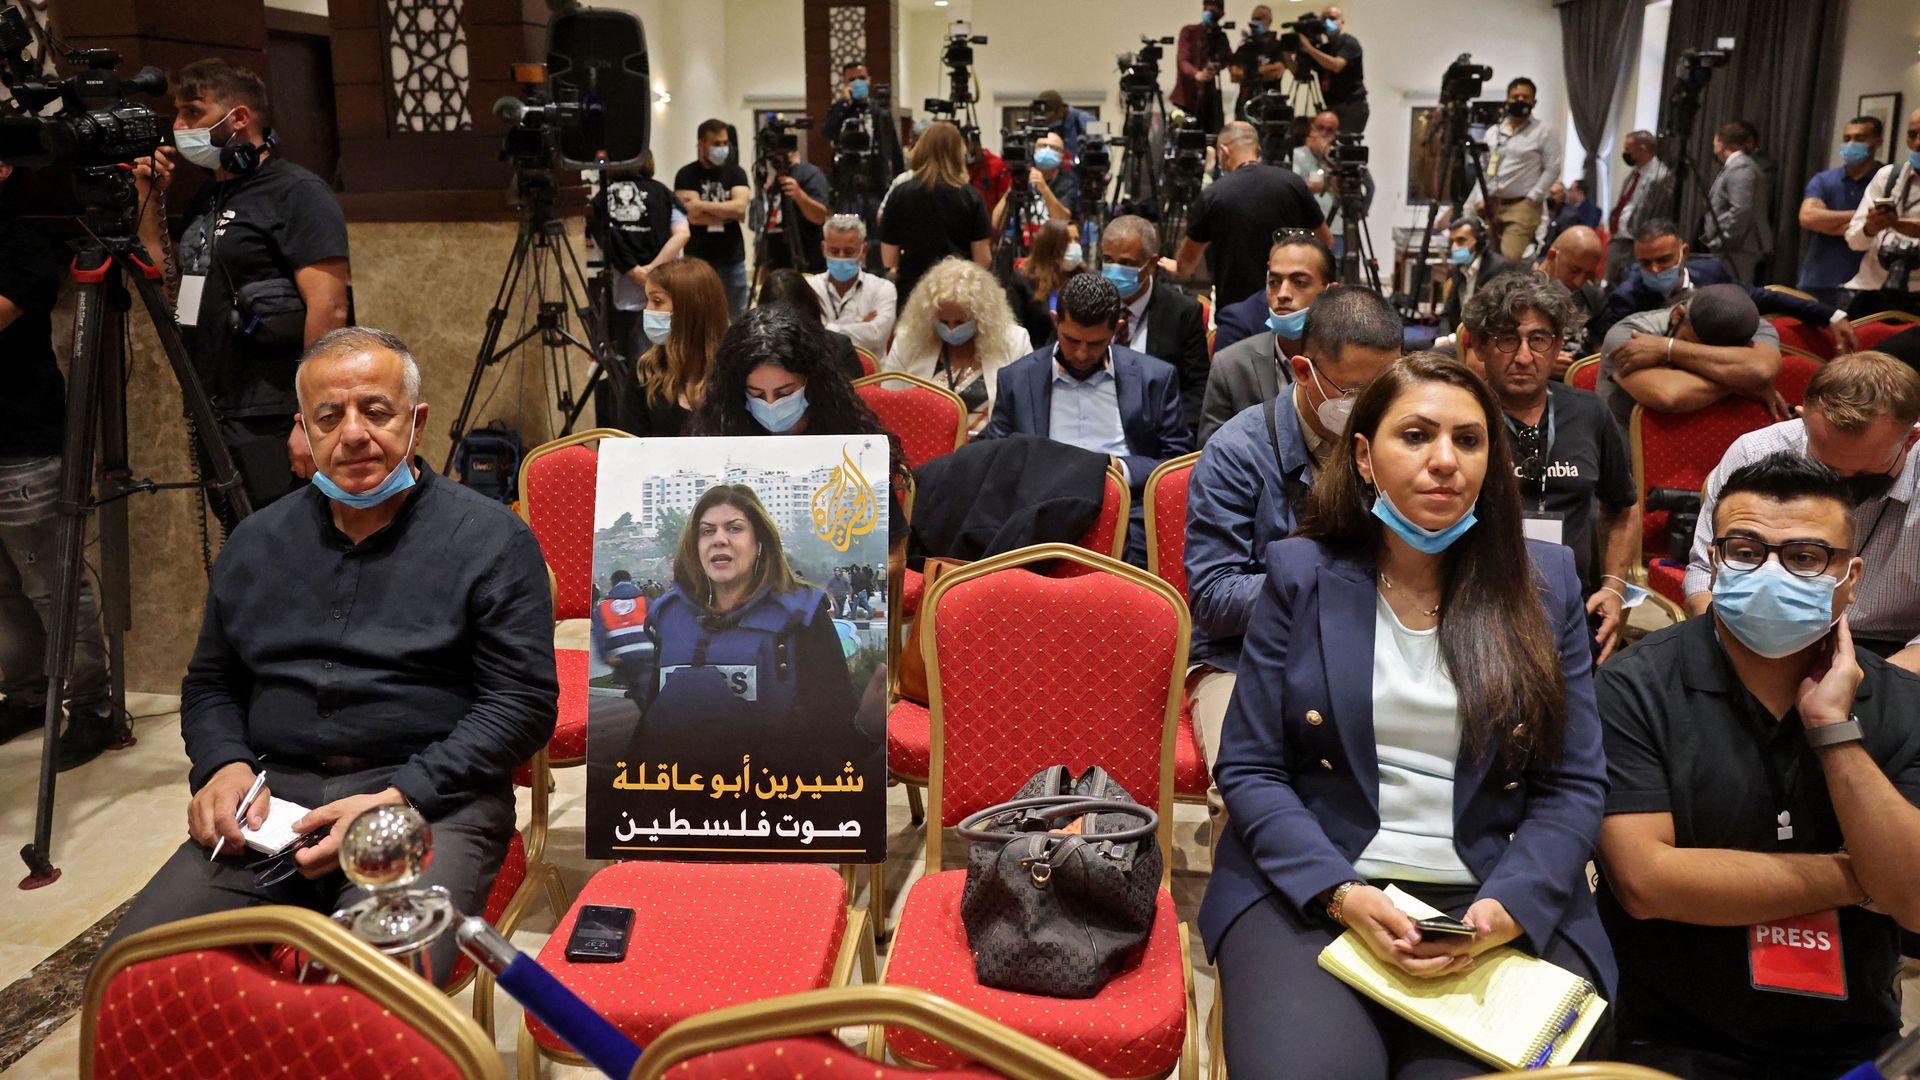 A photo of slain US-Palestinian correspondent Shireen Abu Akleh, with a caption in Arabic reading "Shireen Abu Akleh, the voice of Palestine", is placed amongst reporters